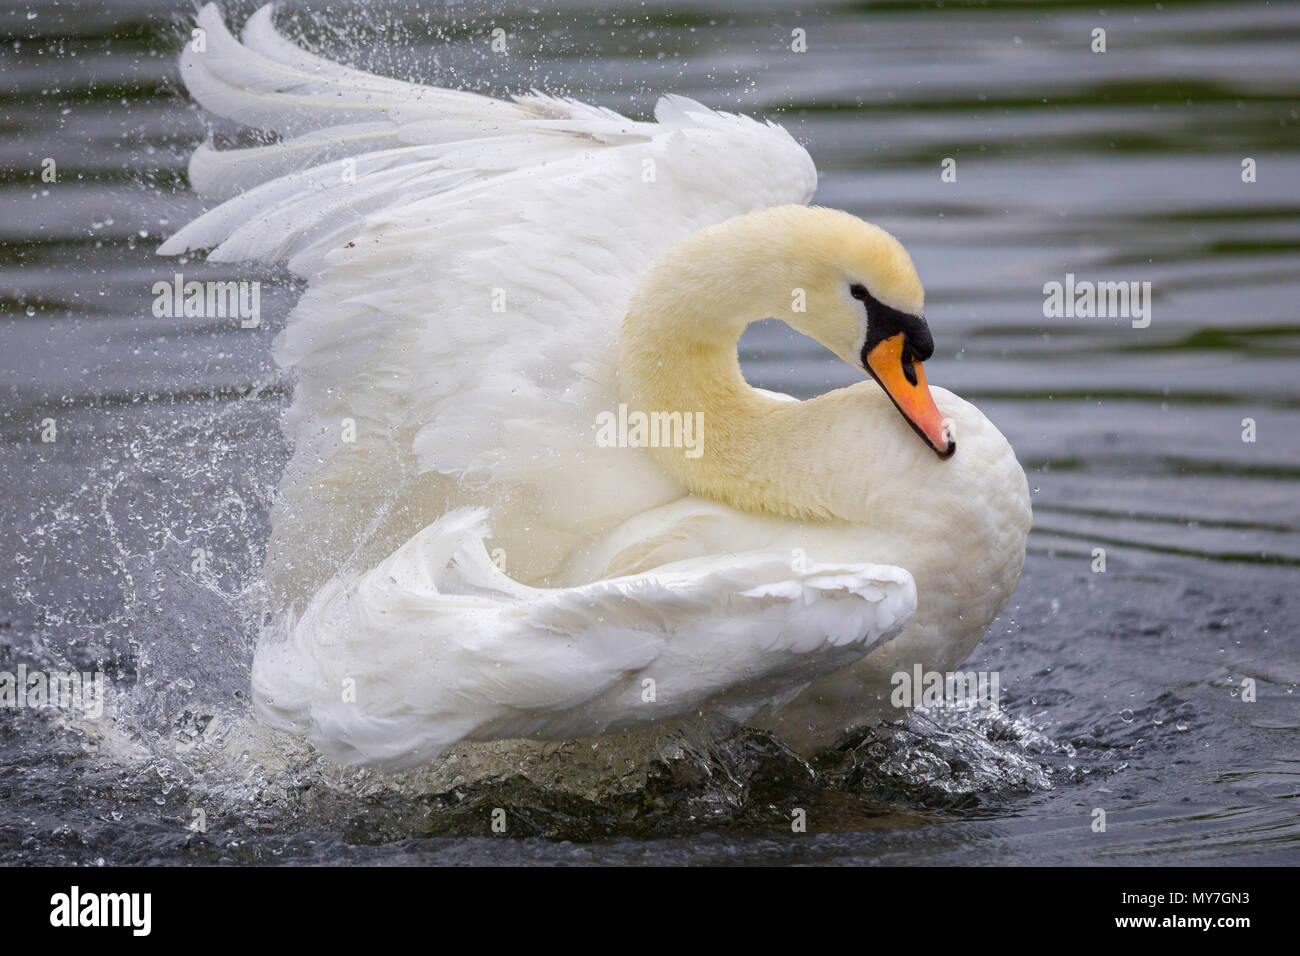 Mute swan (Cygnus olor) bathes and splashes in water, Germany Stock Photo